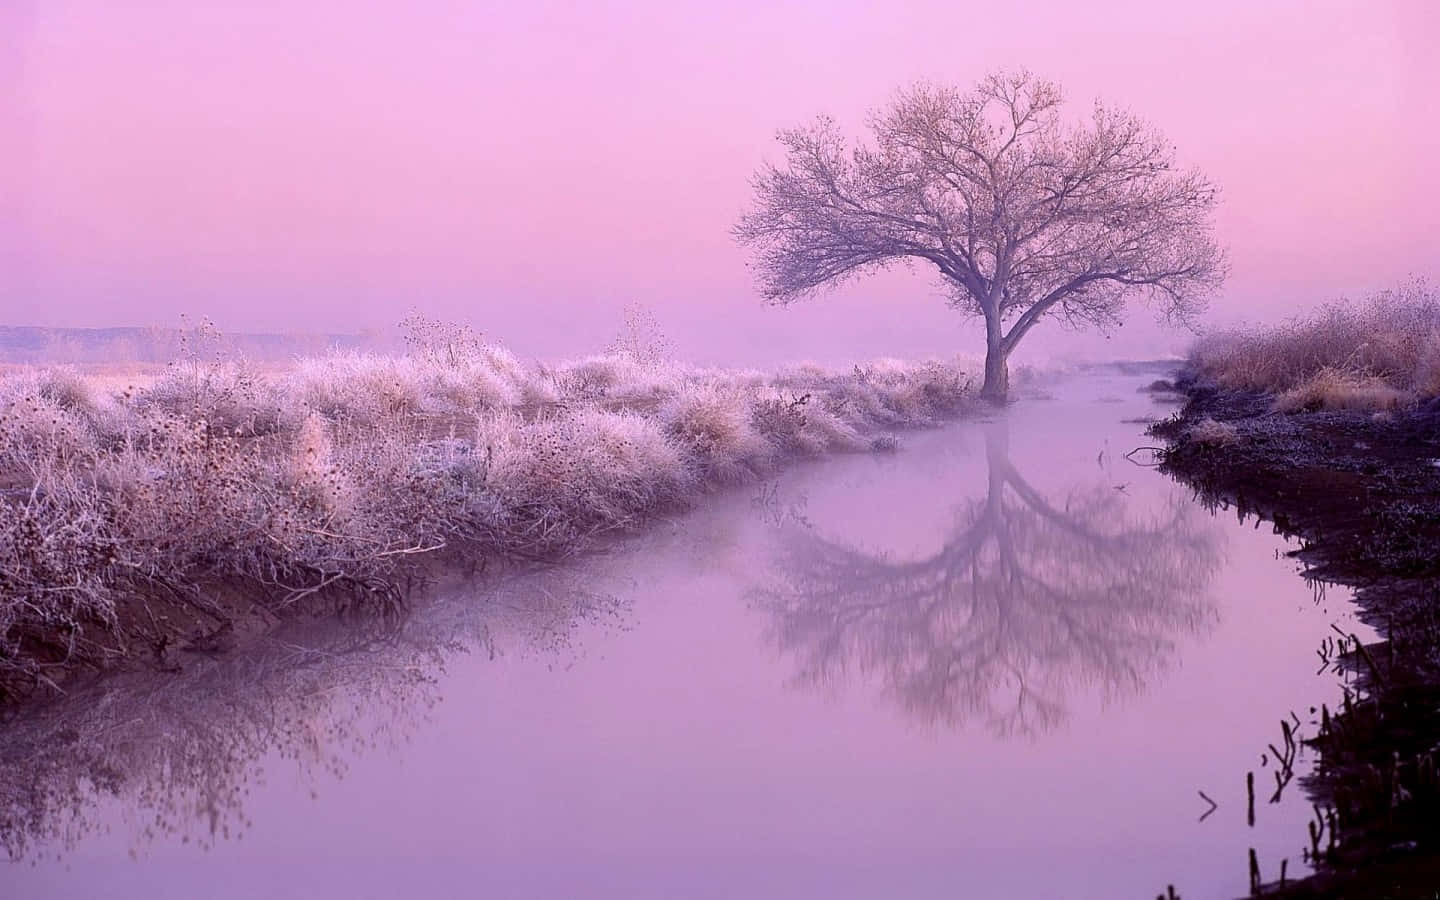 A Lone Tree In A Field With A Pink Sky